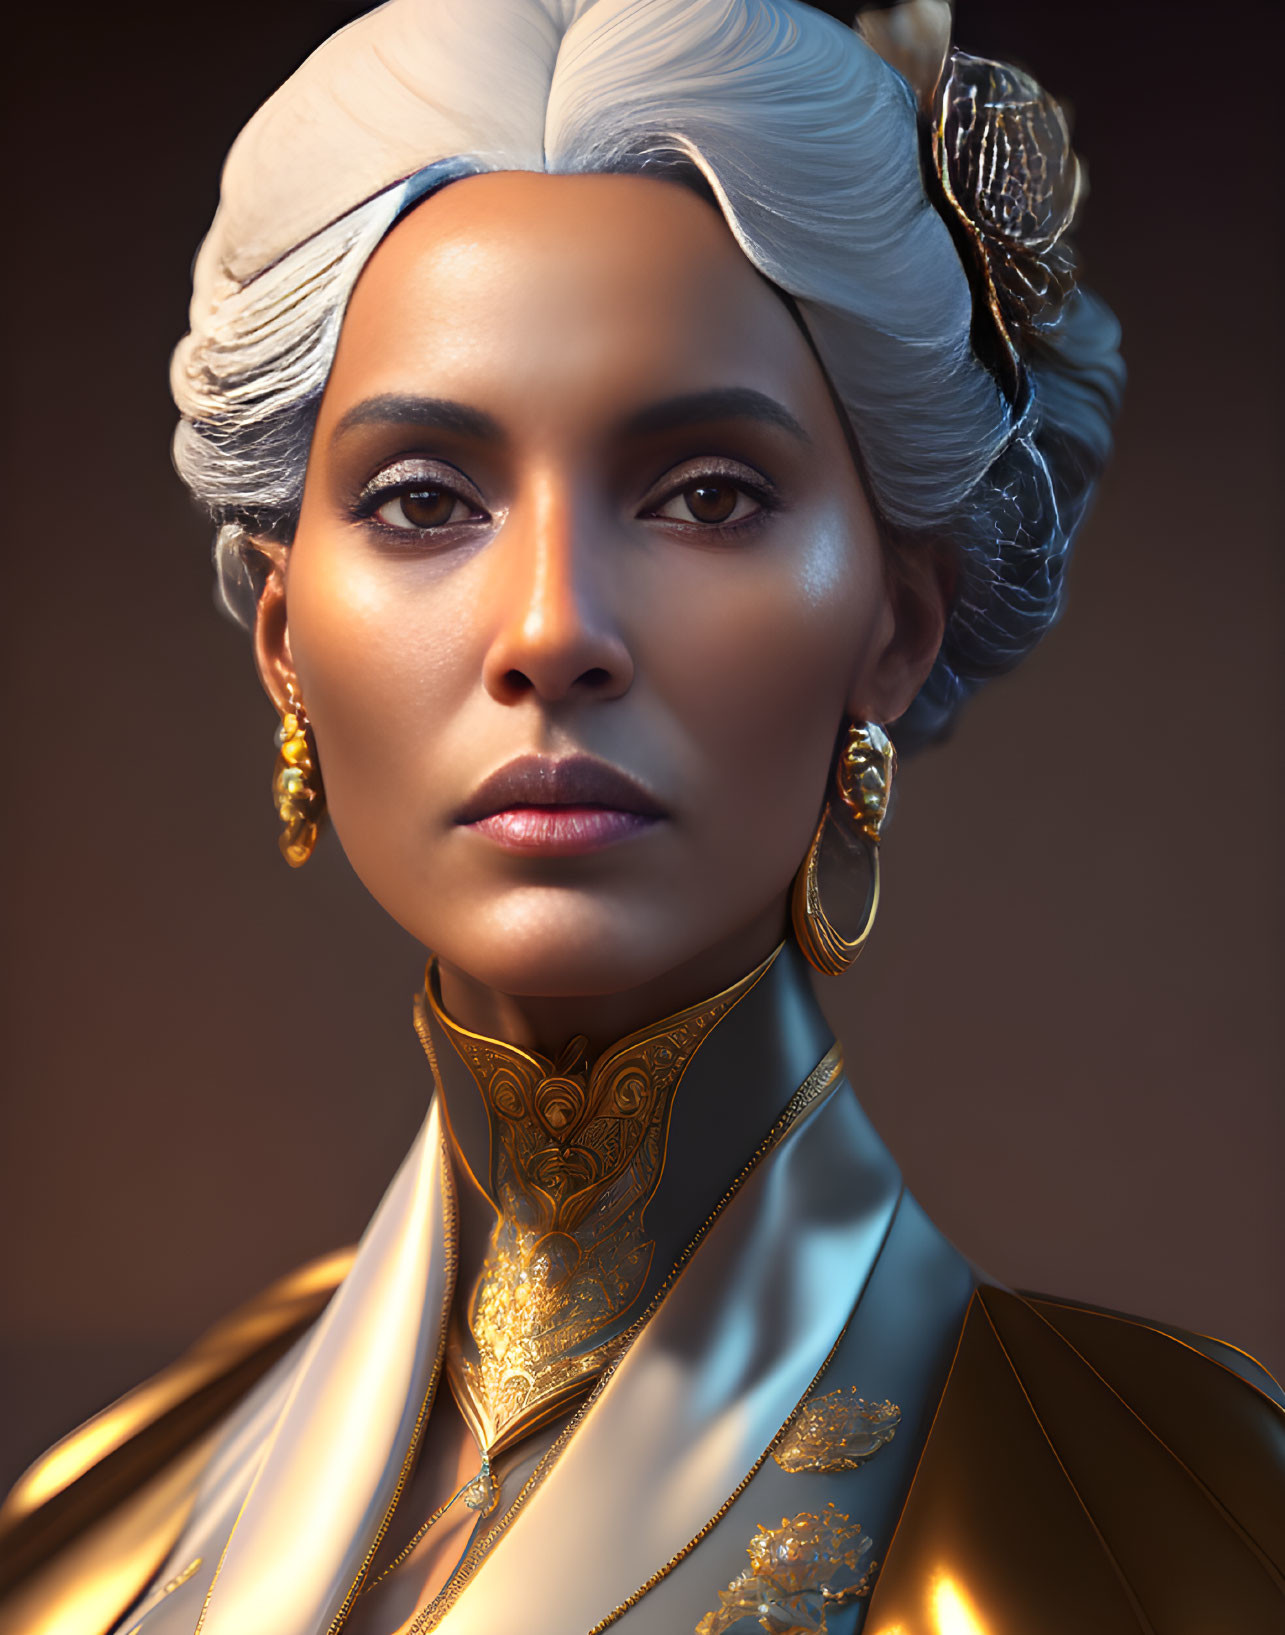 Digital portrait of woman with white hair, golden earrings, and ornate jacket